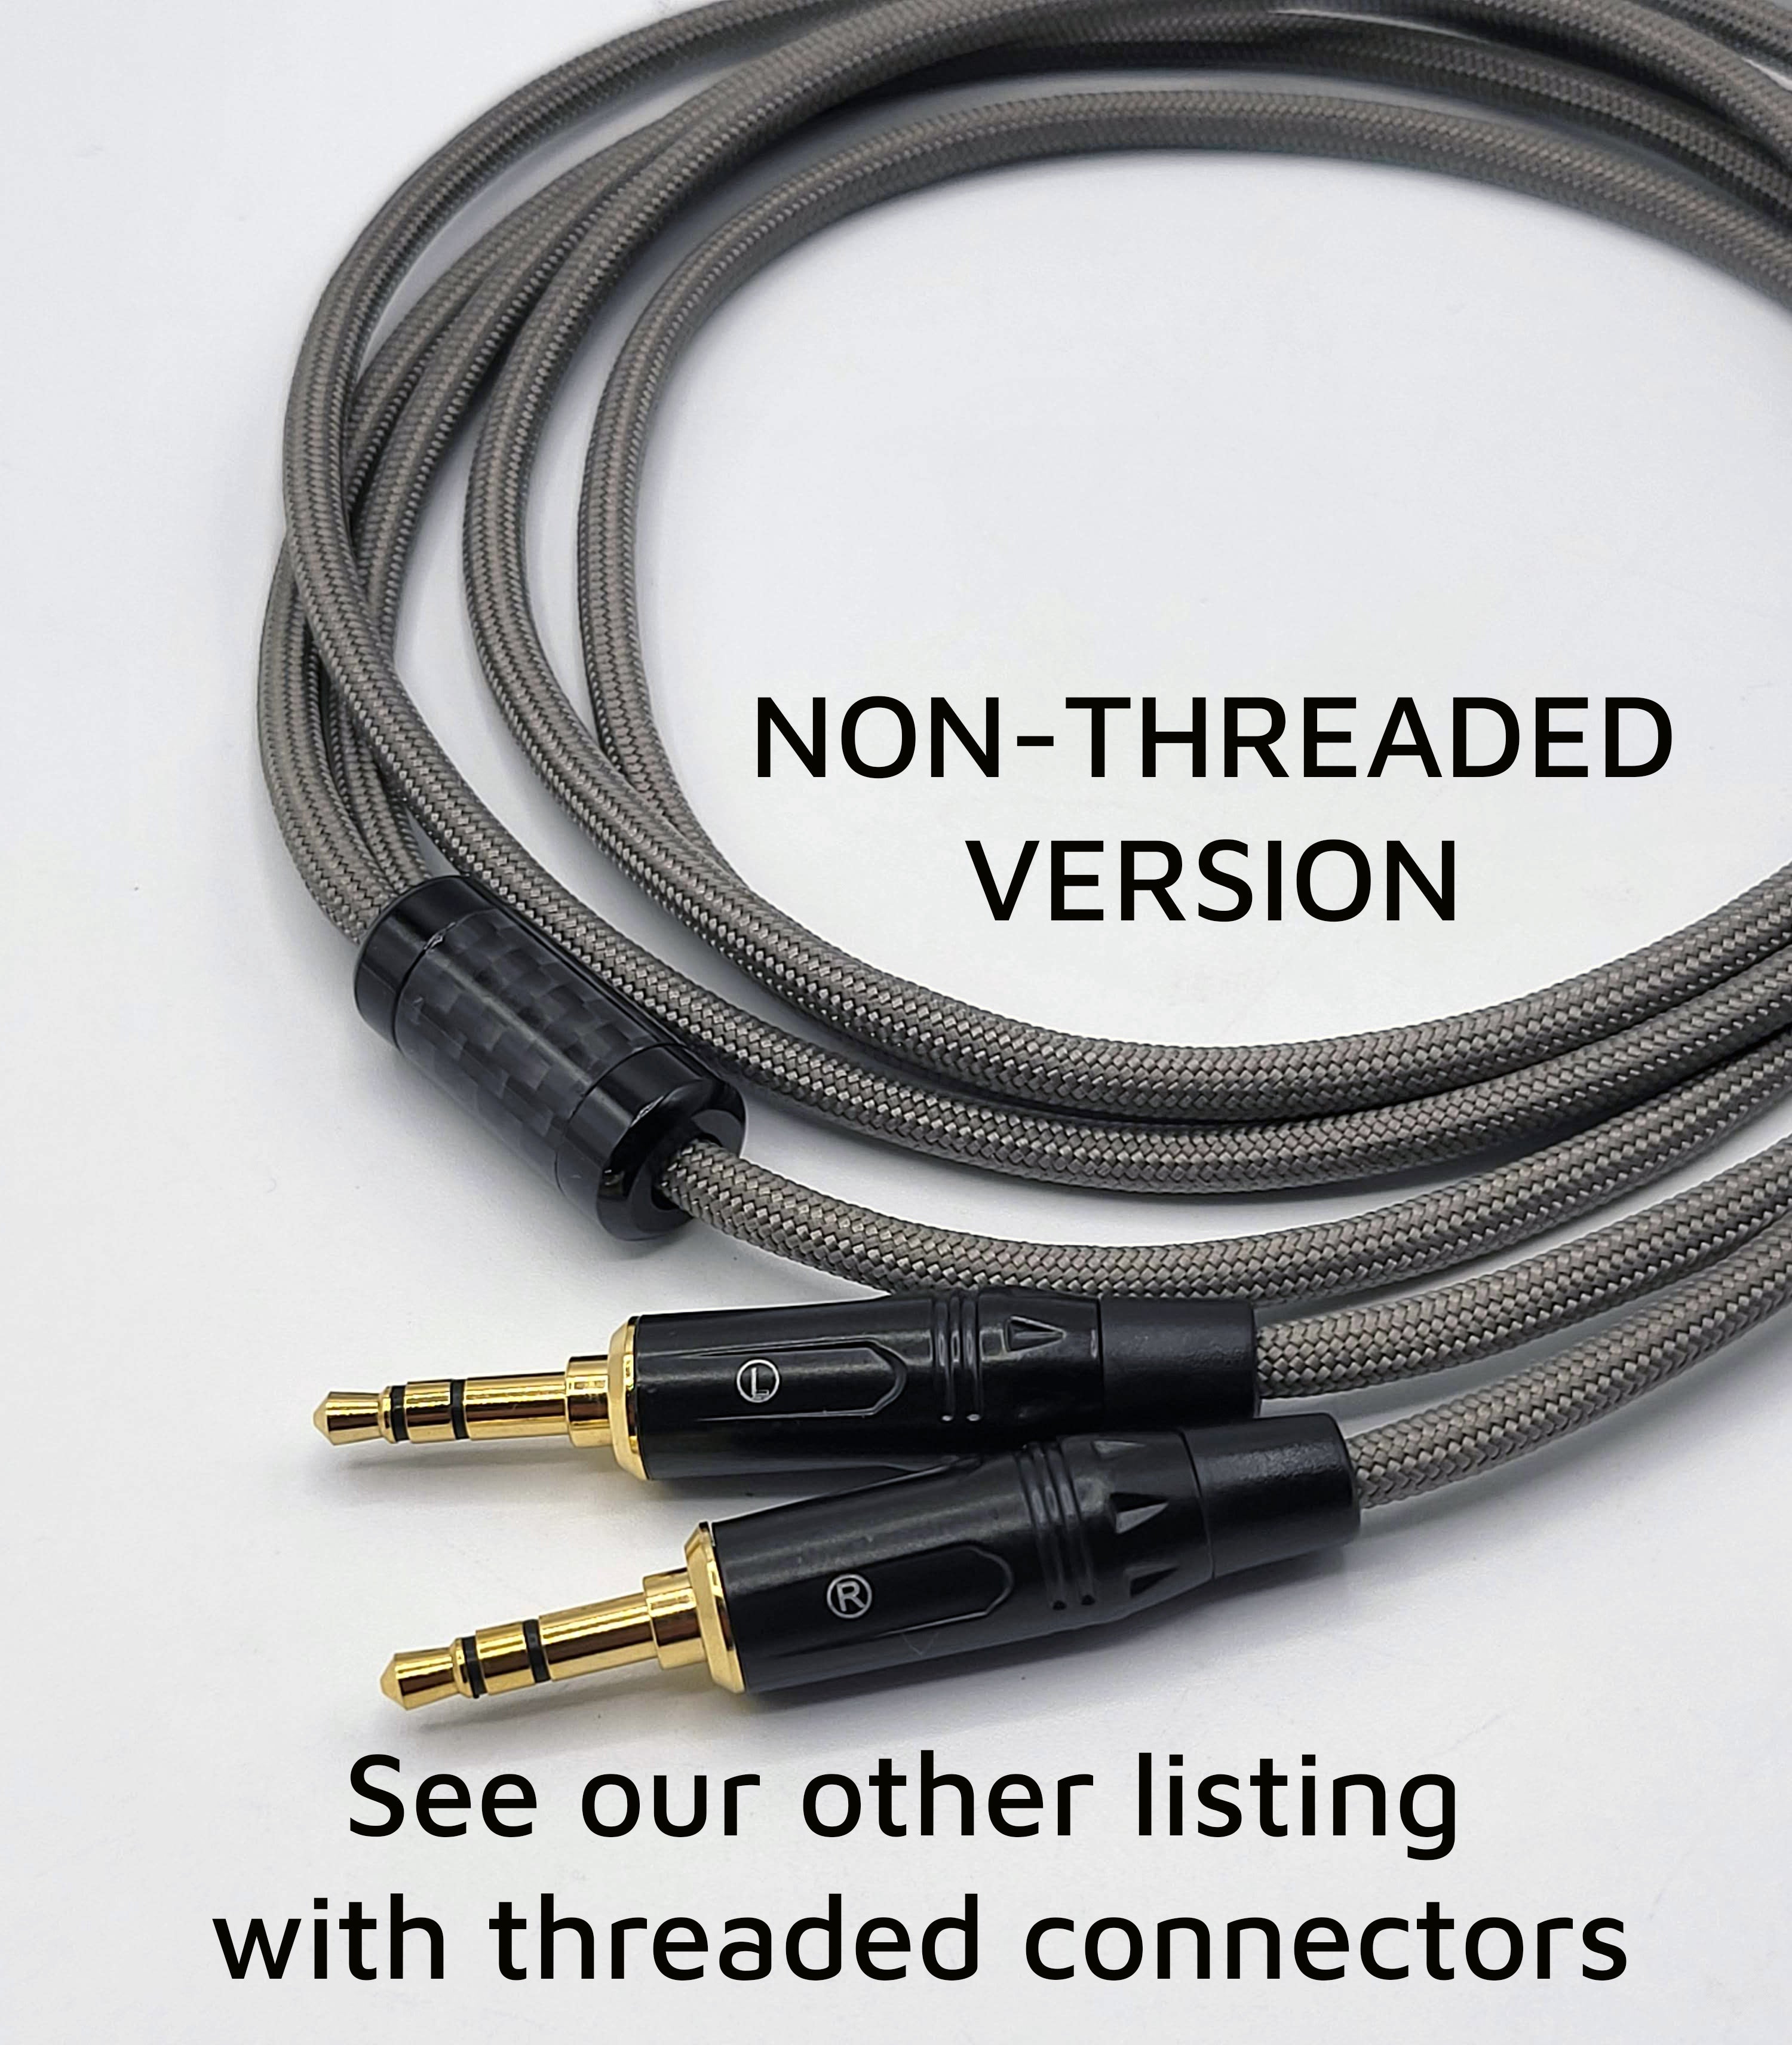 SONY MDR-Z7 Z7R Z1R (Non Threaded) Headphone Cable  - Balanced or Single Ended